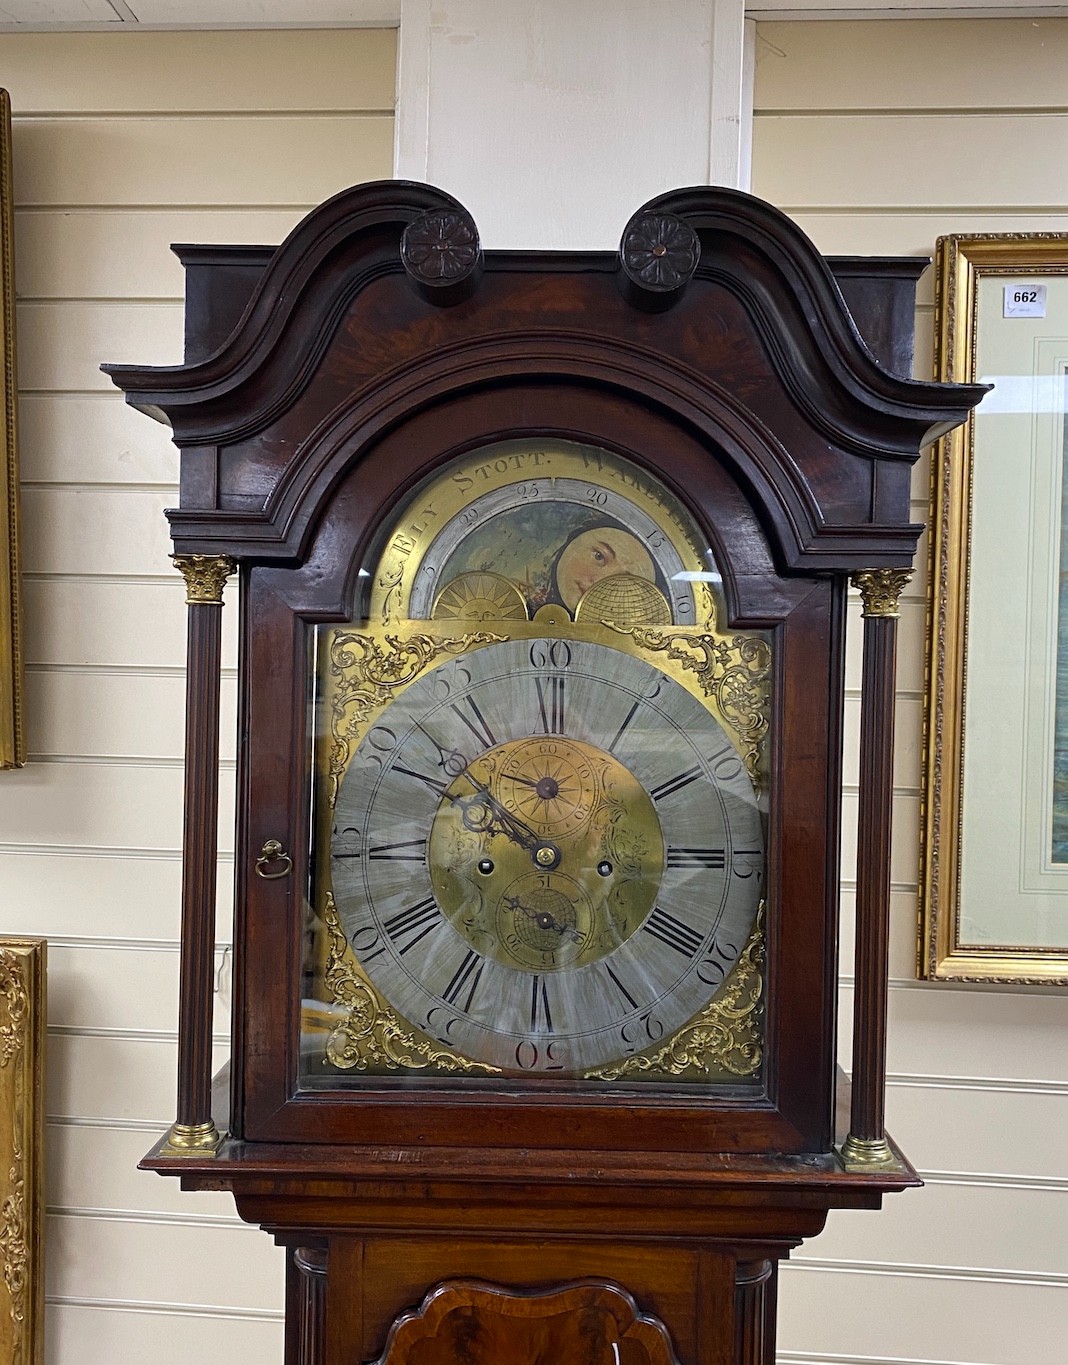 A George III mahogany 8 day longcase clock, the moonphase dial marked Ely Stott, Wakefield, height 227cm